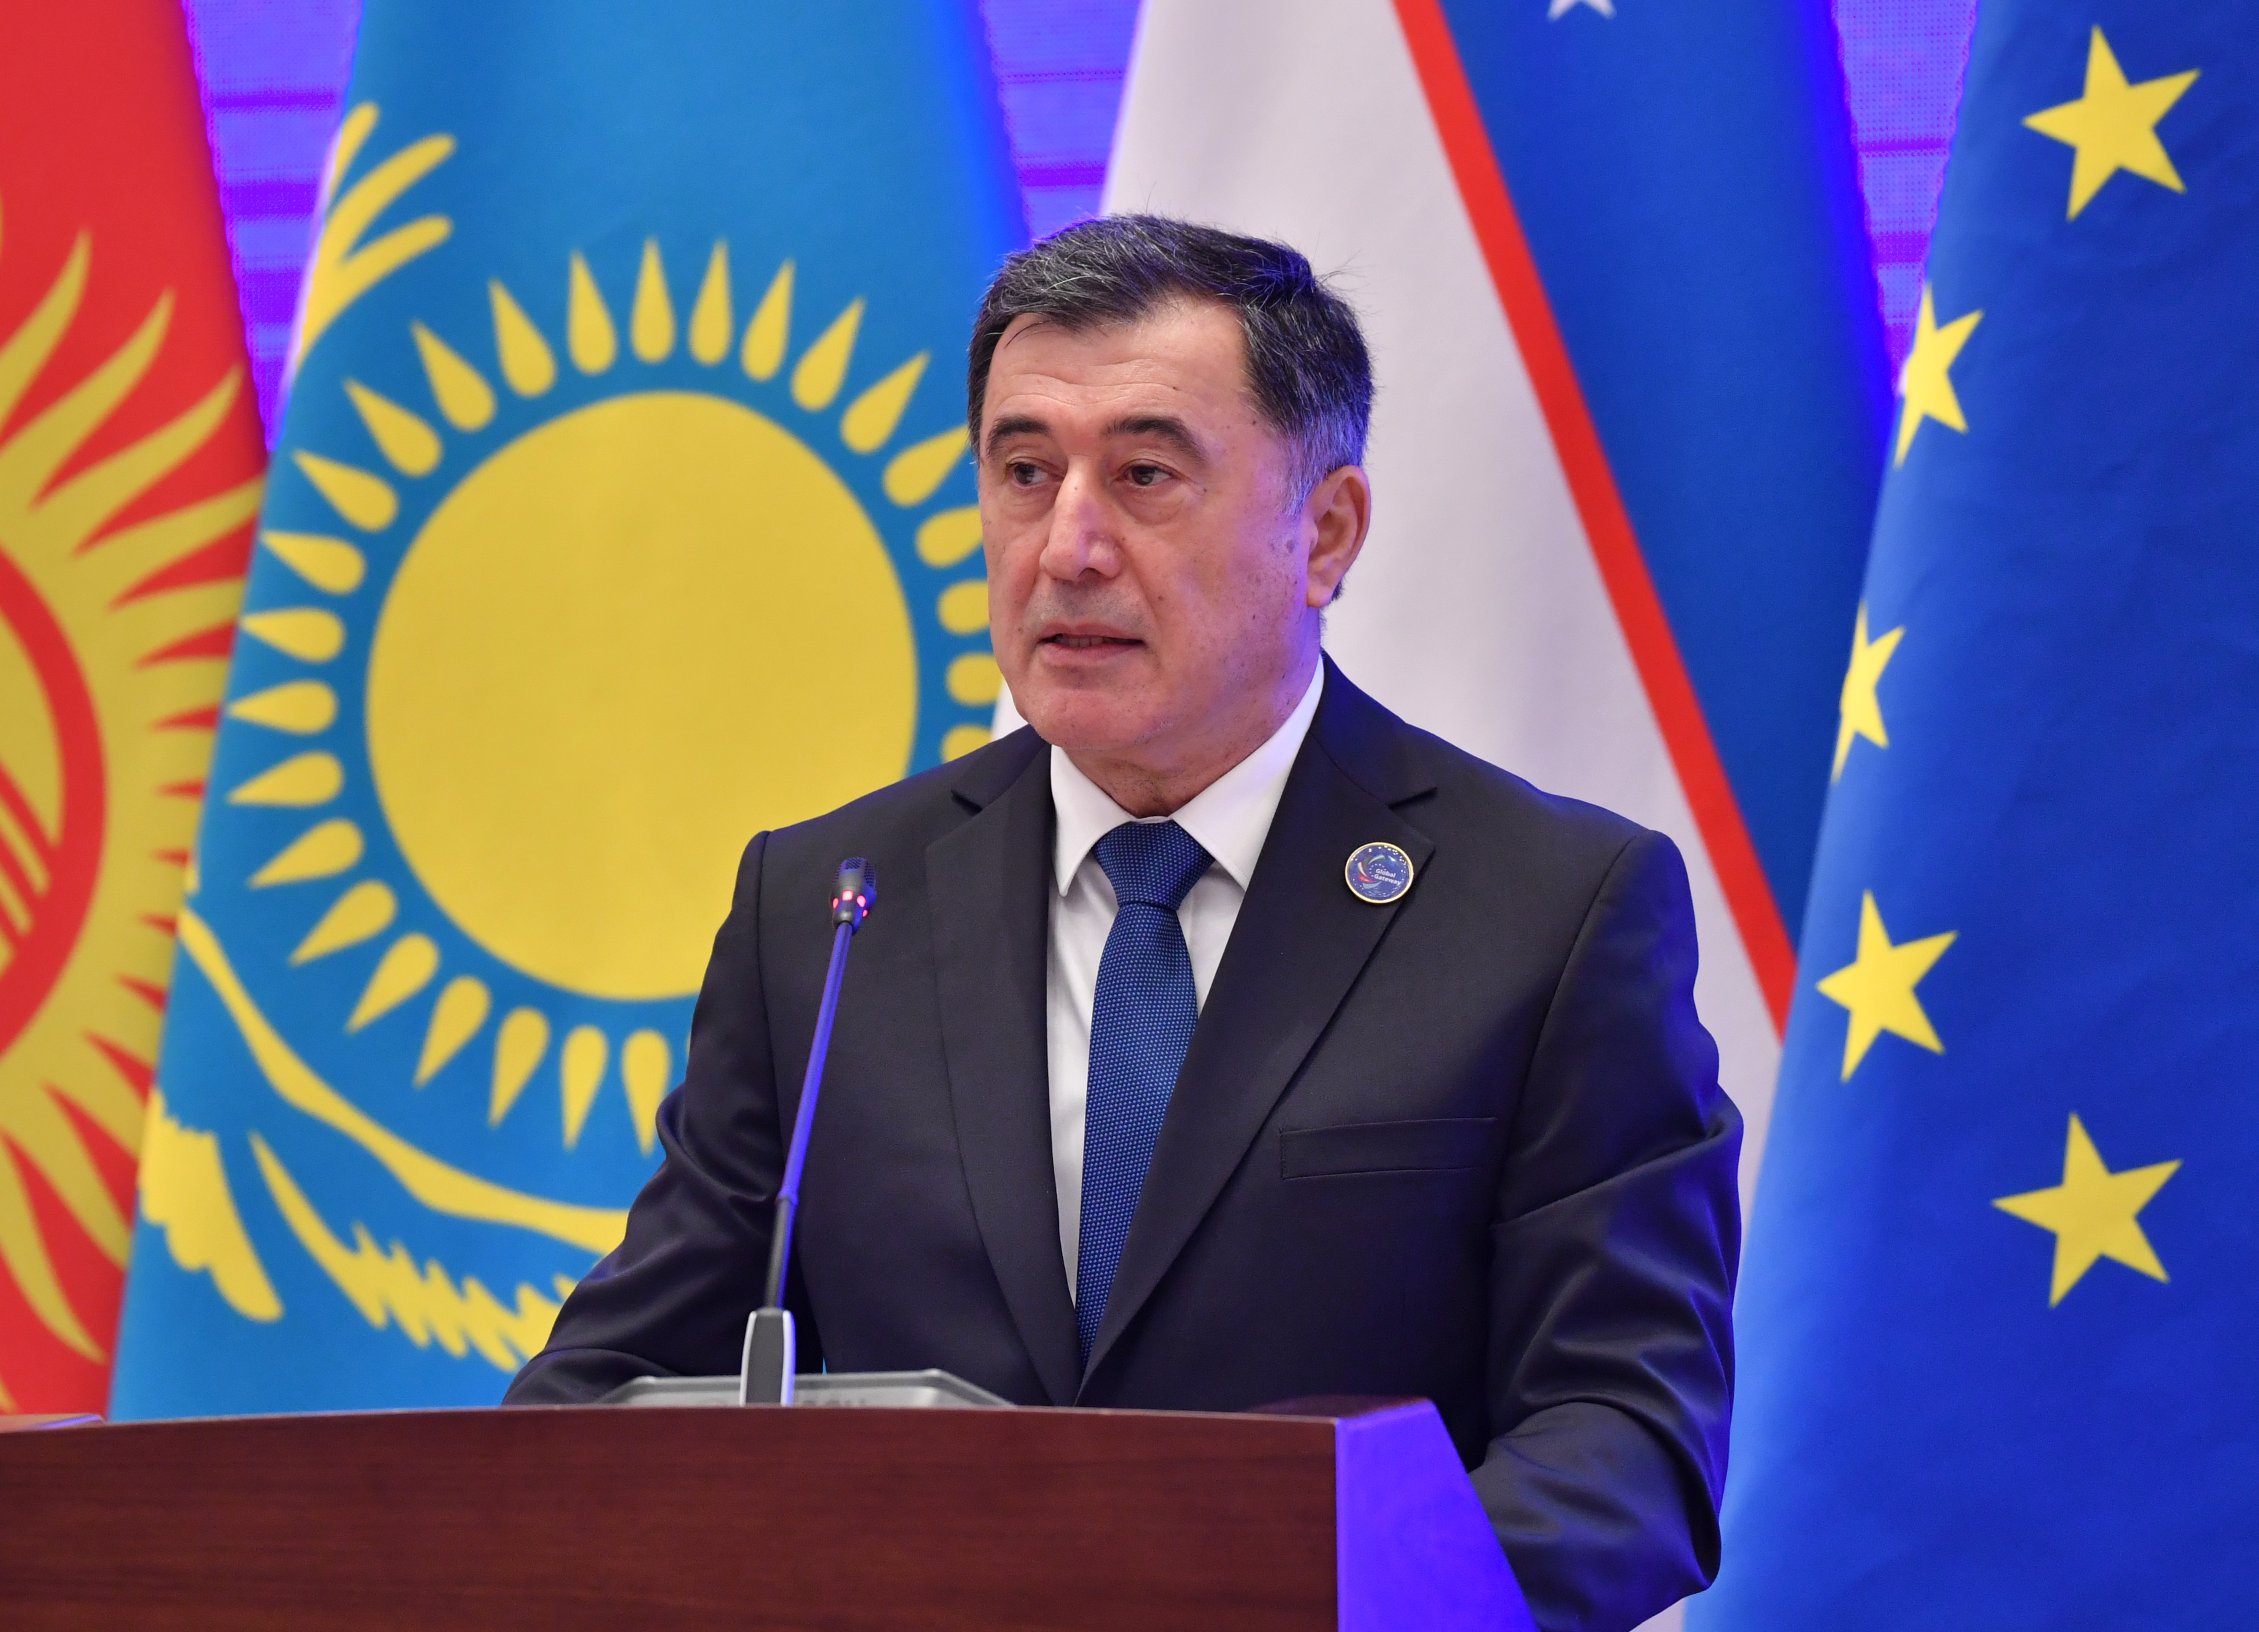 Minister of Foreign Affairs of the Republic of Uzbekistan Vladimir Norov.